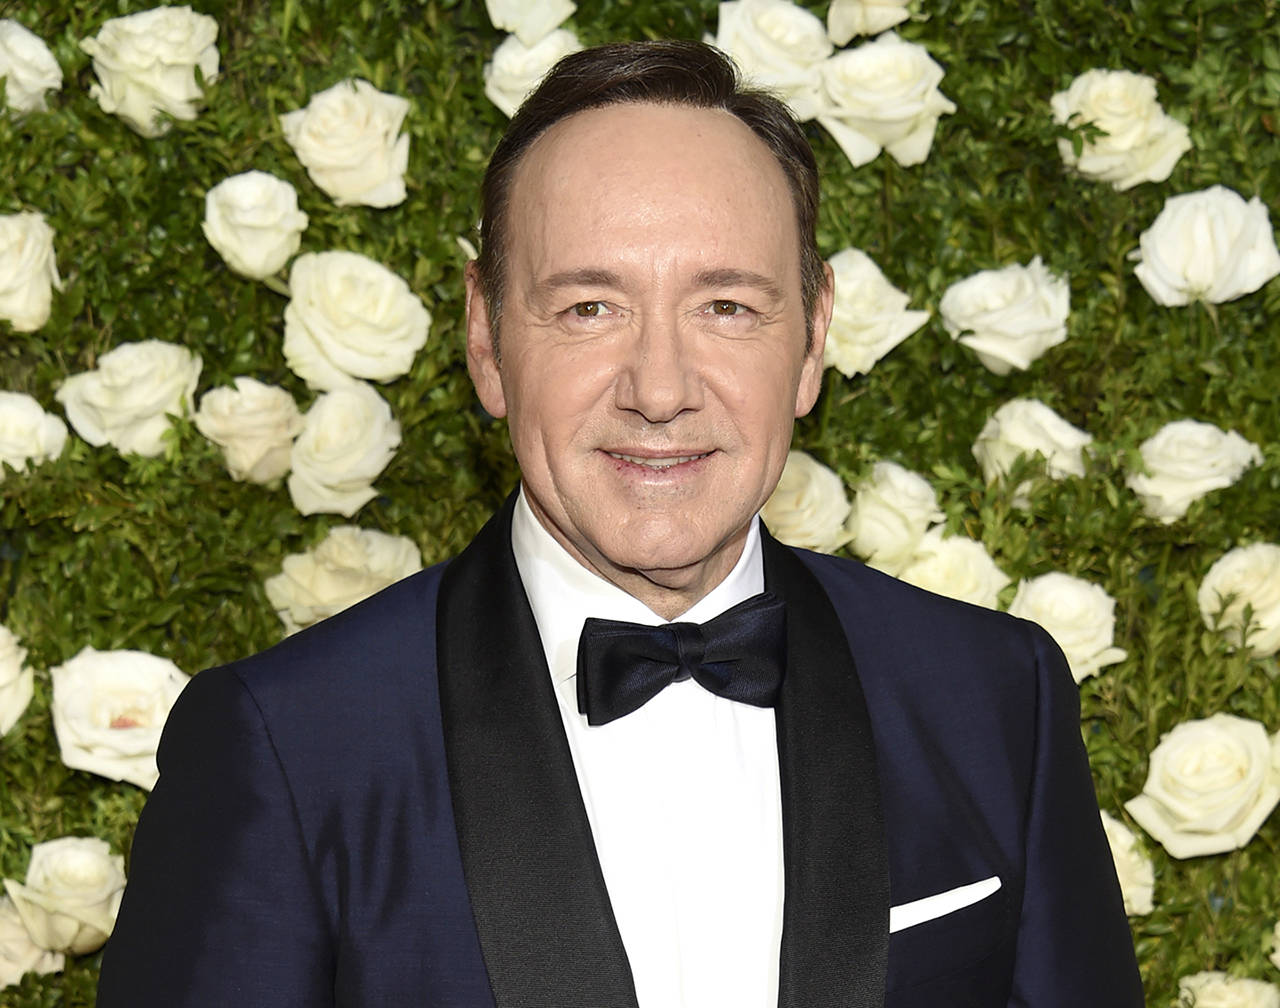 In this June 11 photo, Kevin Spacey arrives at the 71st annual Tony Awards at Radio City Music Hall in New York. (Photo by Evan Agostini/Invision/AP, File)